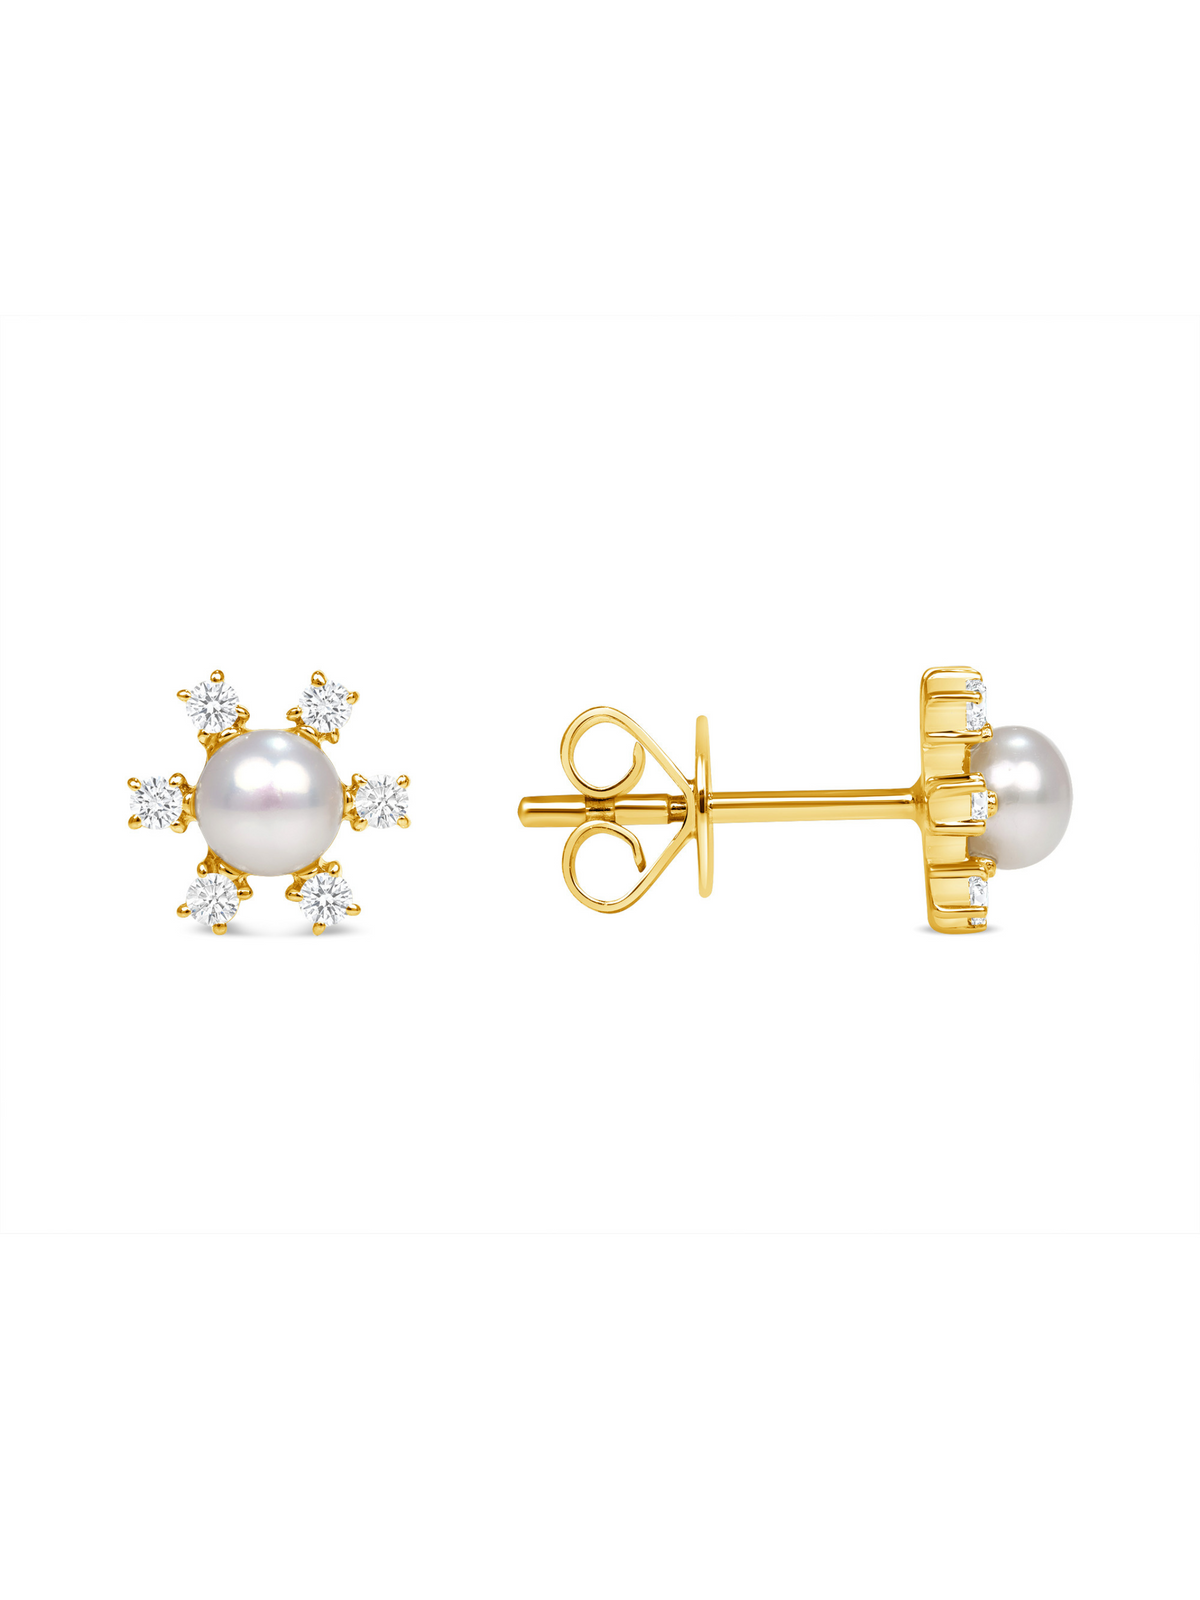 Flower and pearl earrings yellow gold on white background